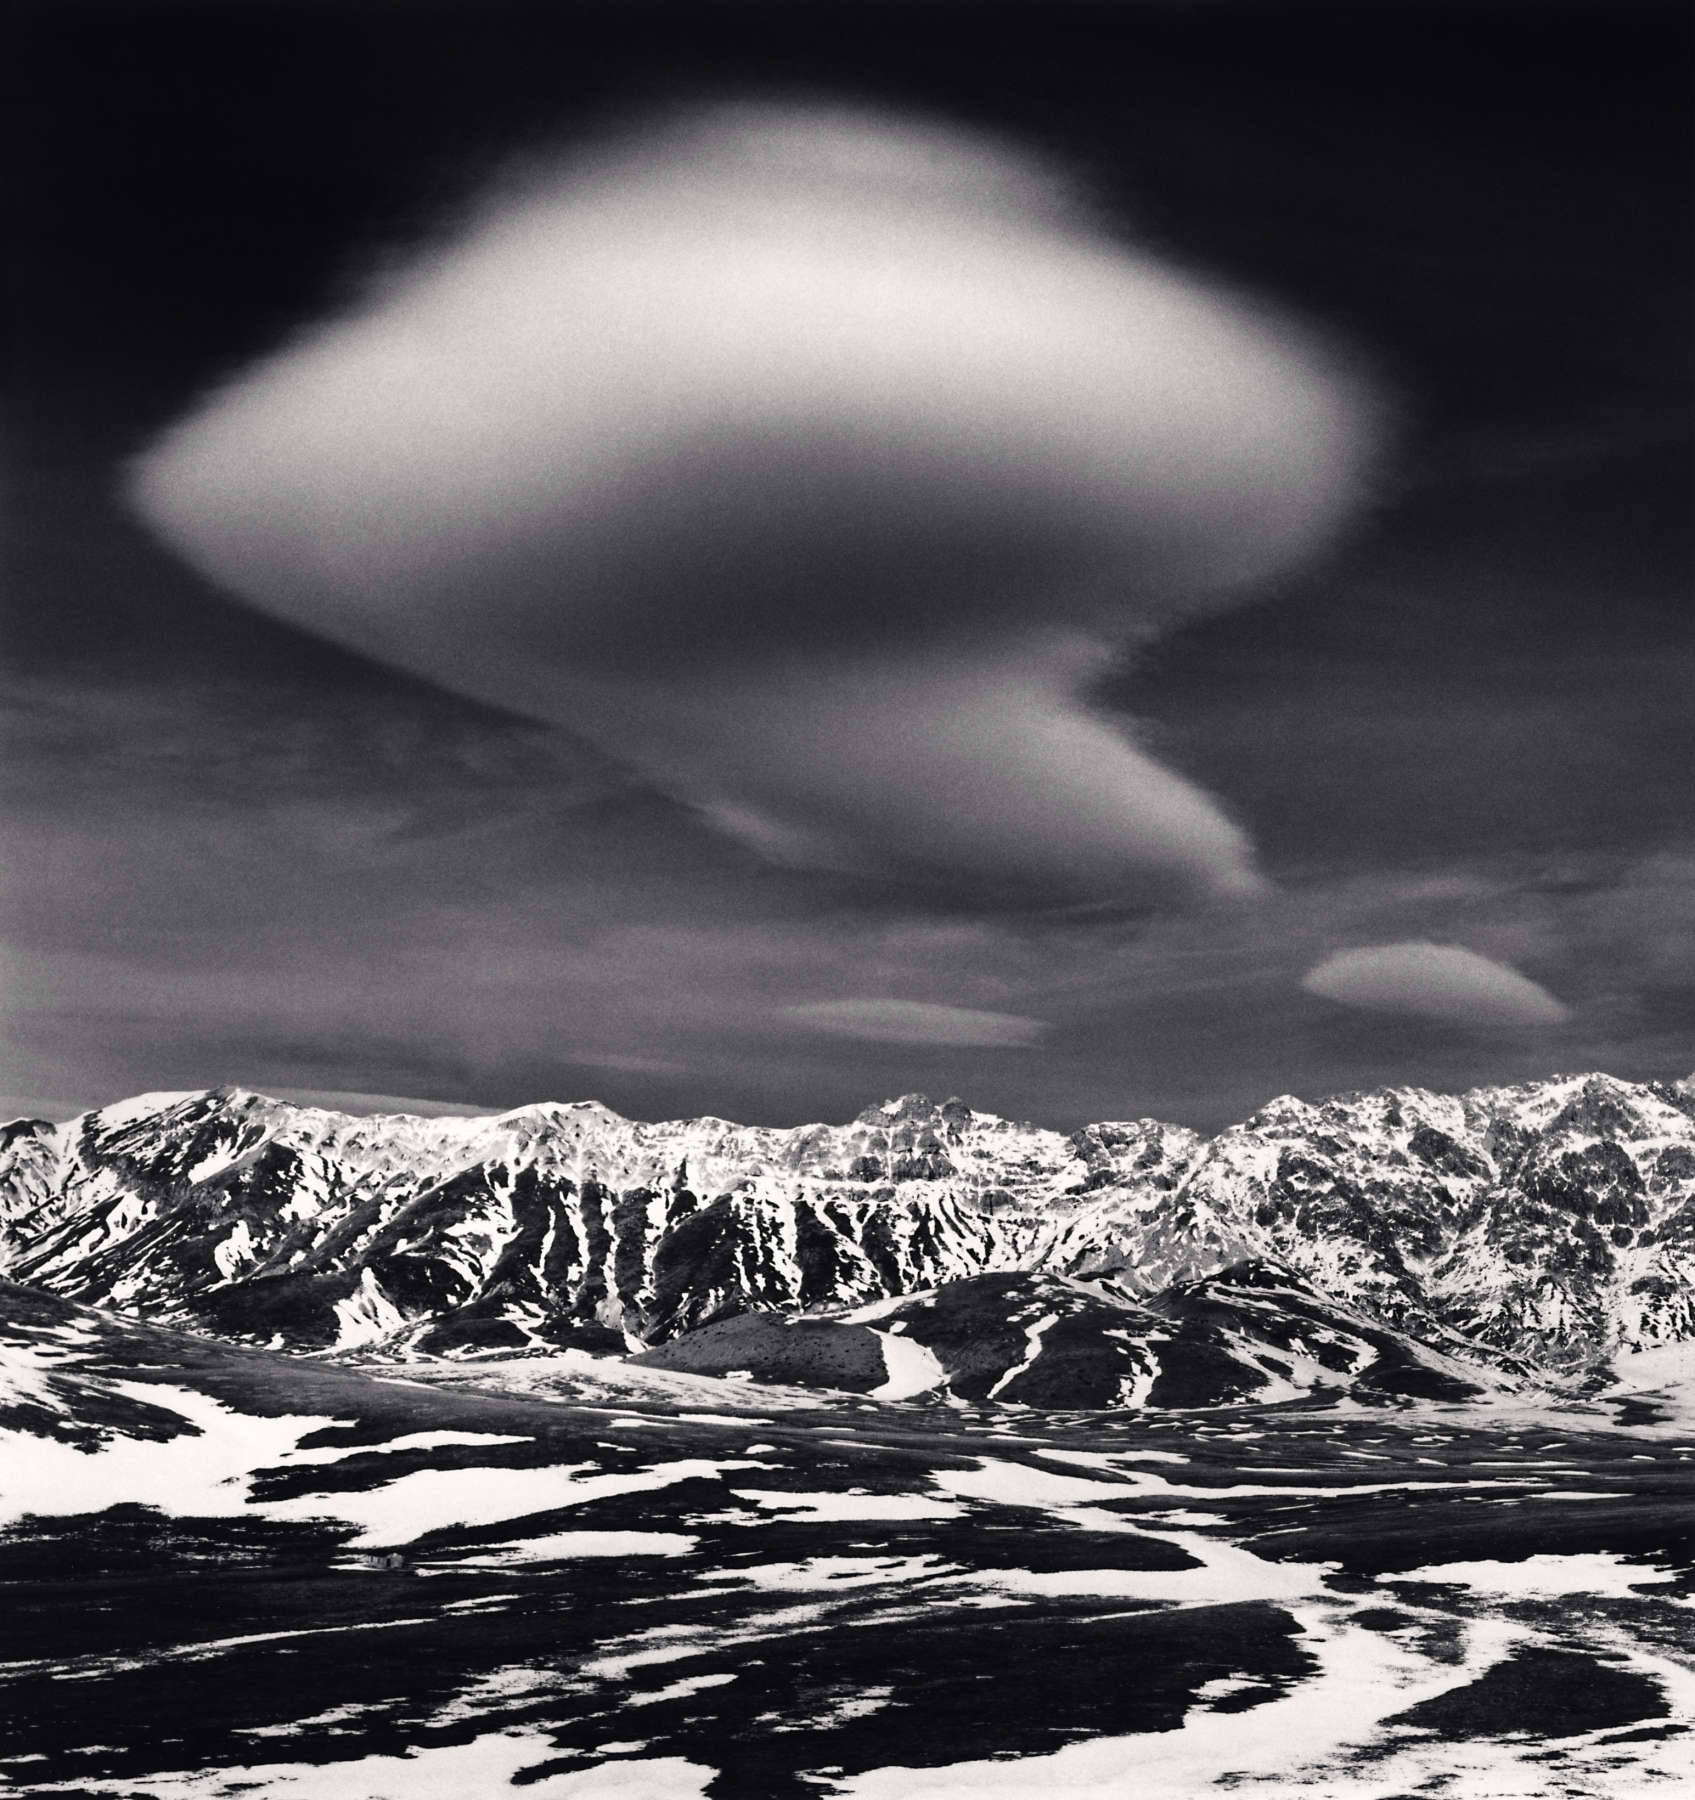 Michael Kenna, Curious Cloud, Campo Imperatore, Abruzzo, Italy 